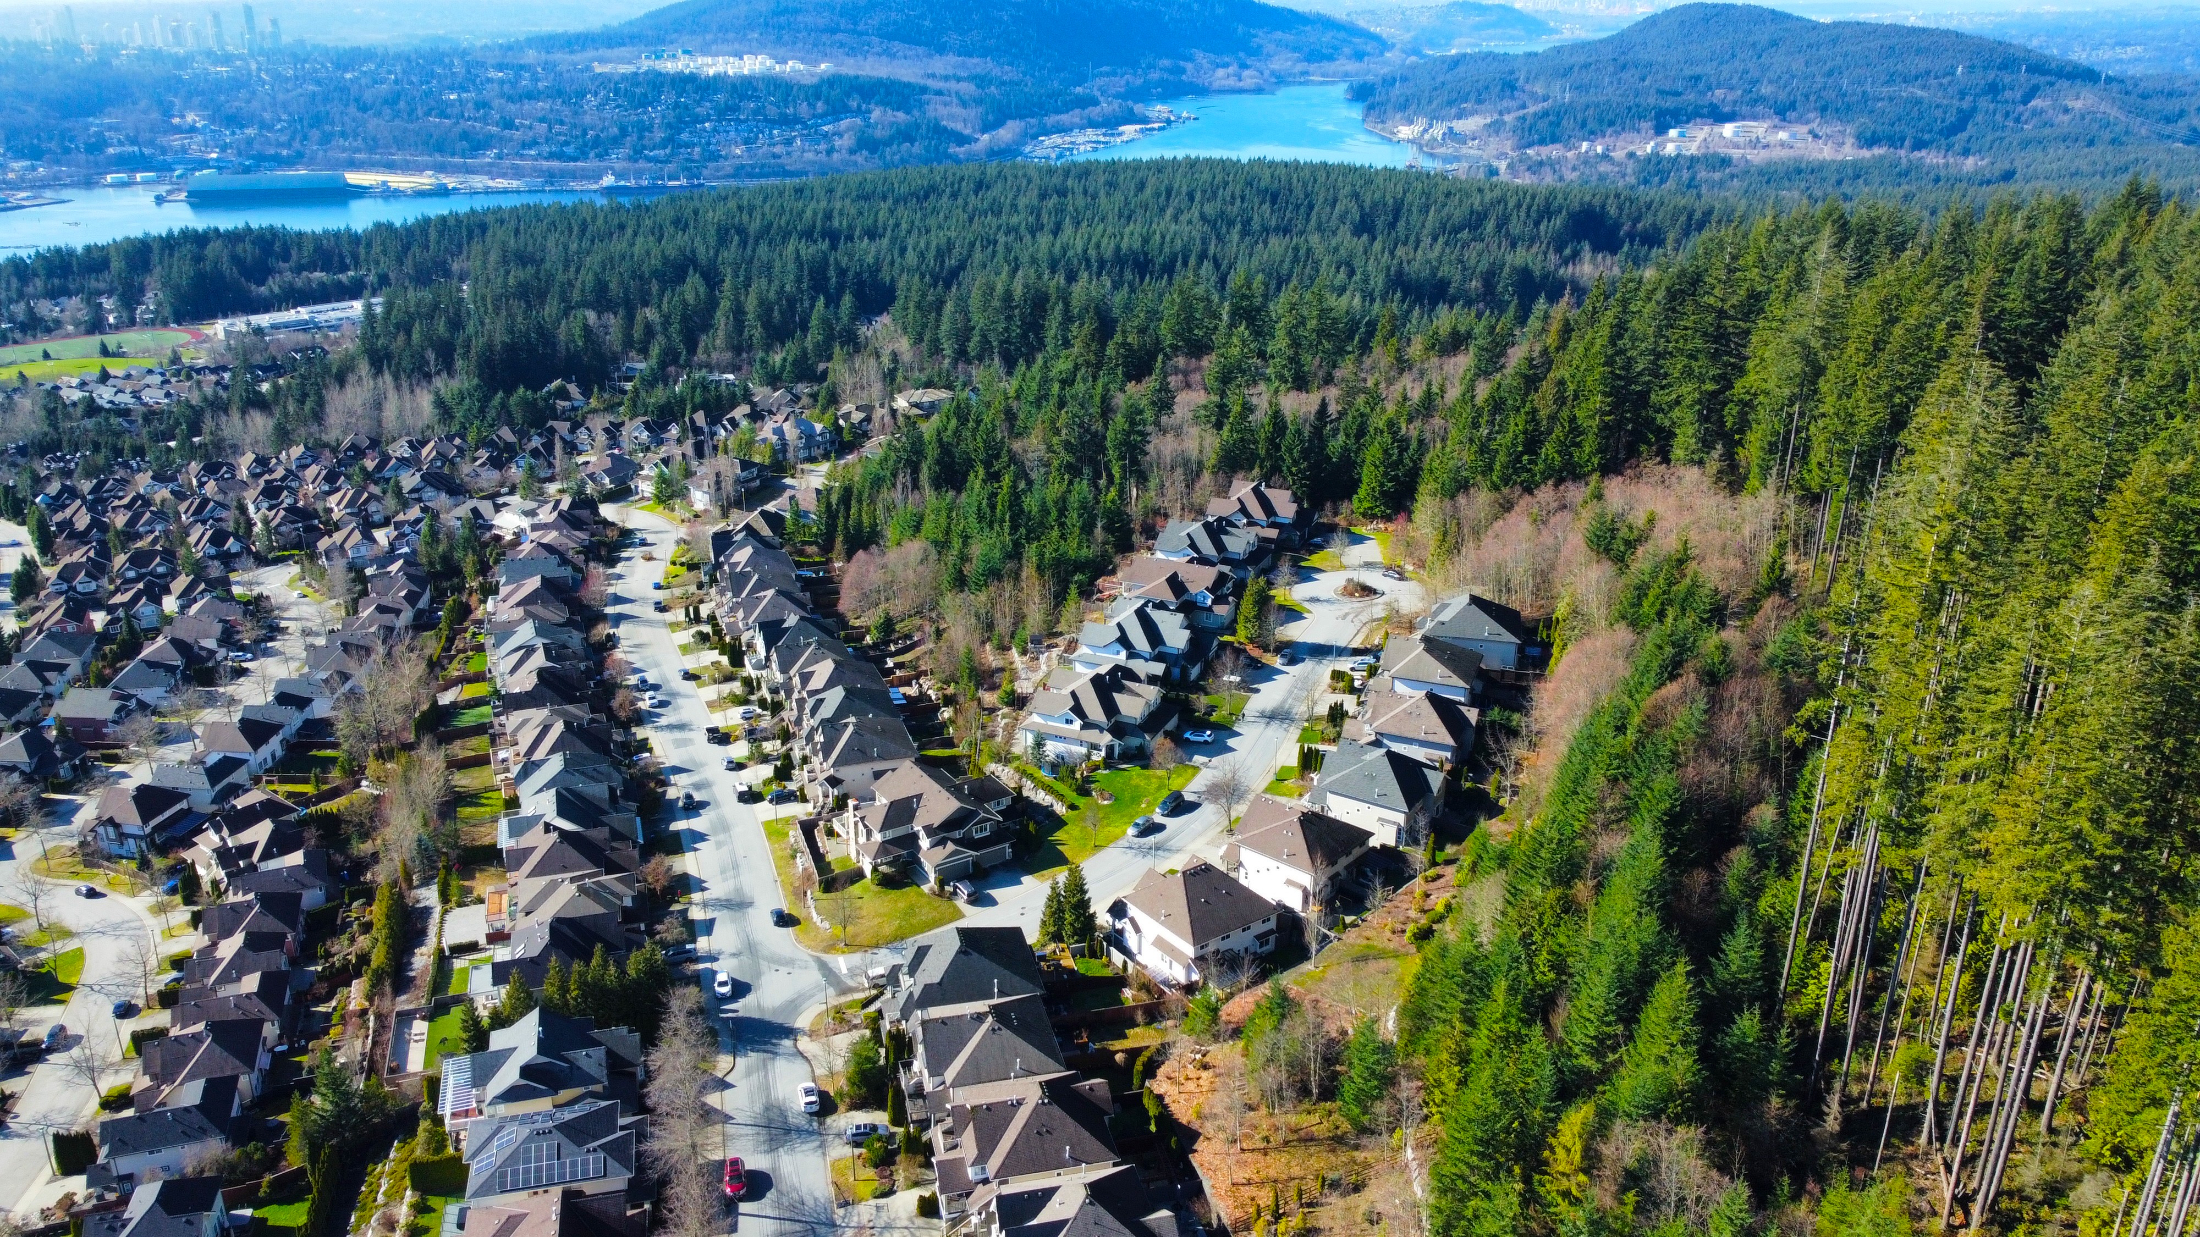 Port Moody is a great place to live